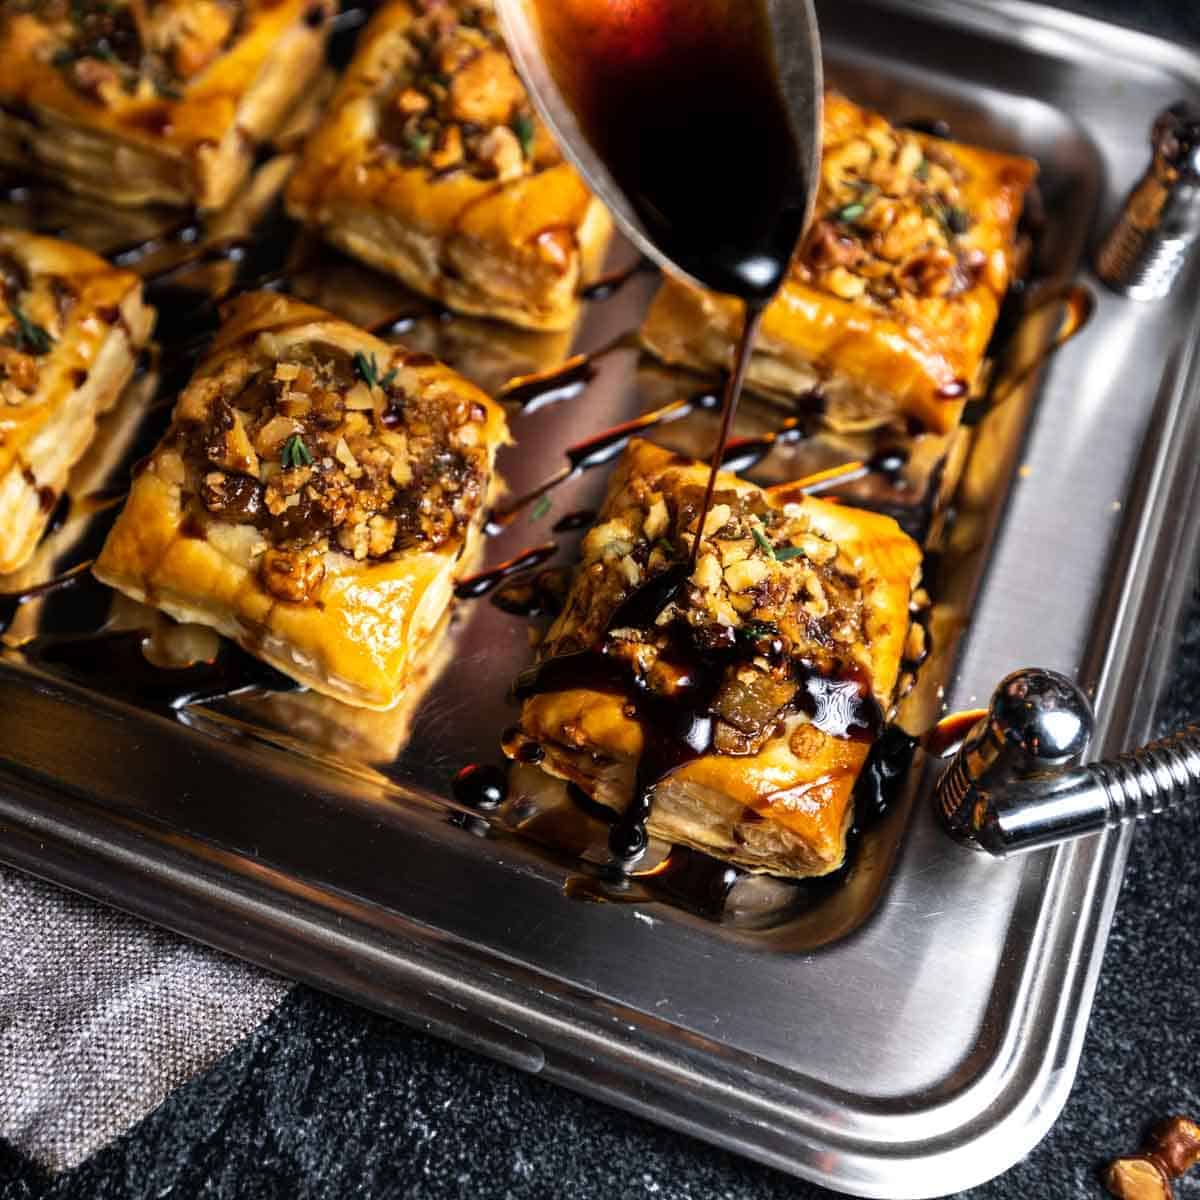 A spoon drizzling balsamic glaze over a pear and blue cheese appetizer tart.